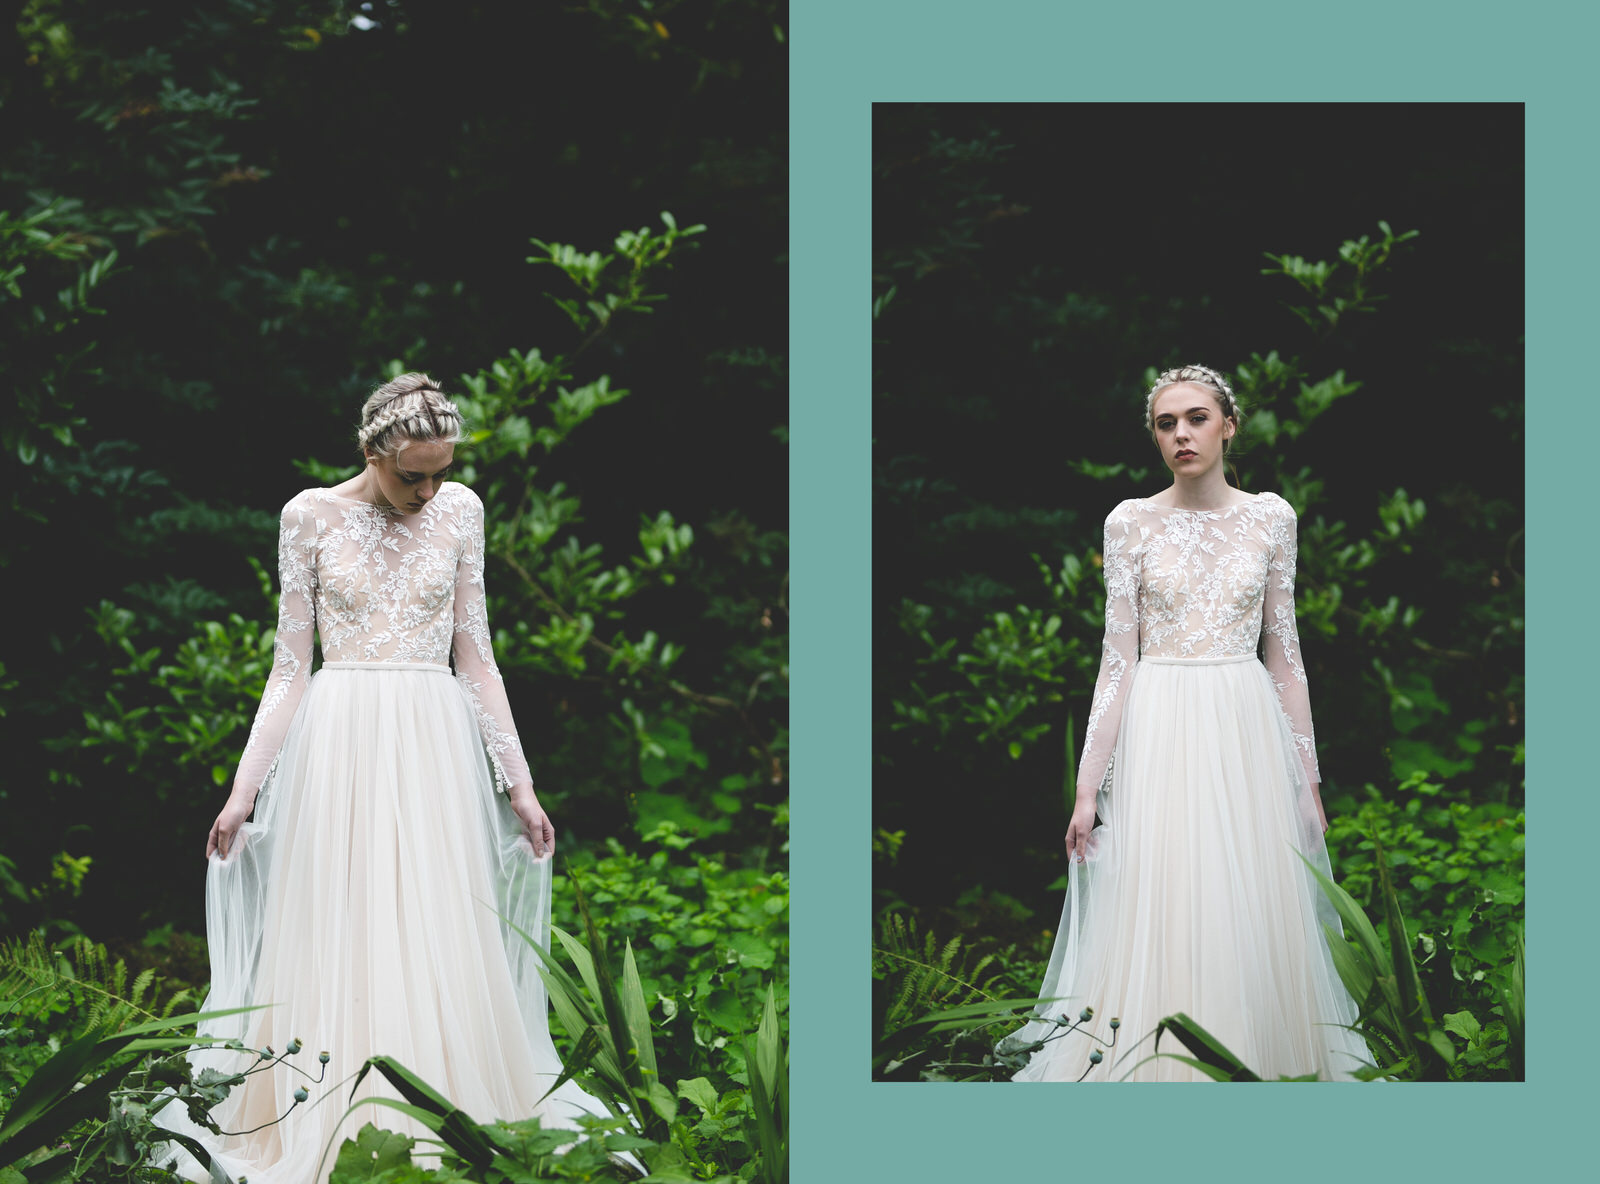 Dreamy tulle & lace wedding dress from Alicia May Bridal 